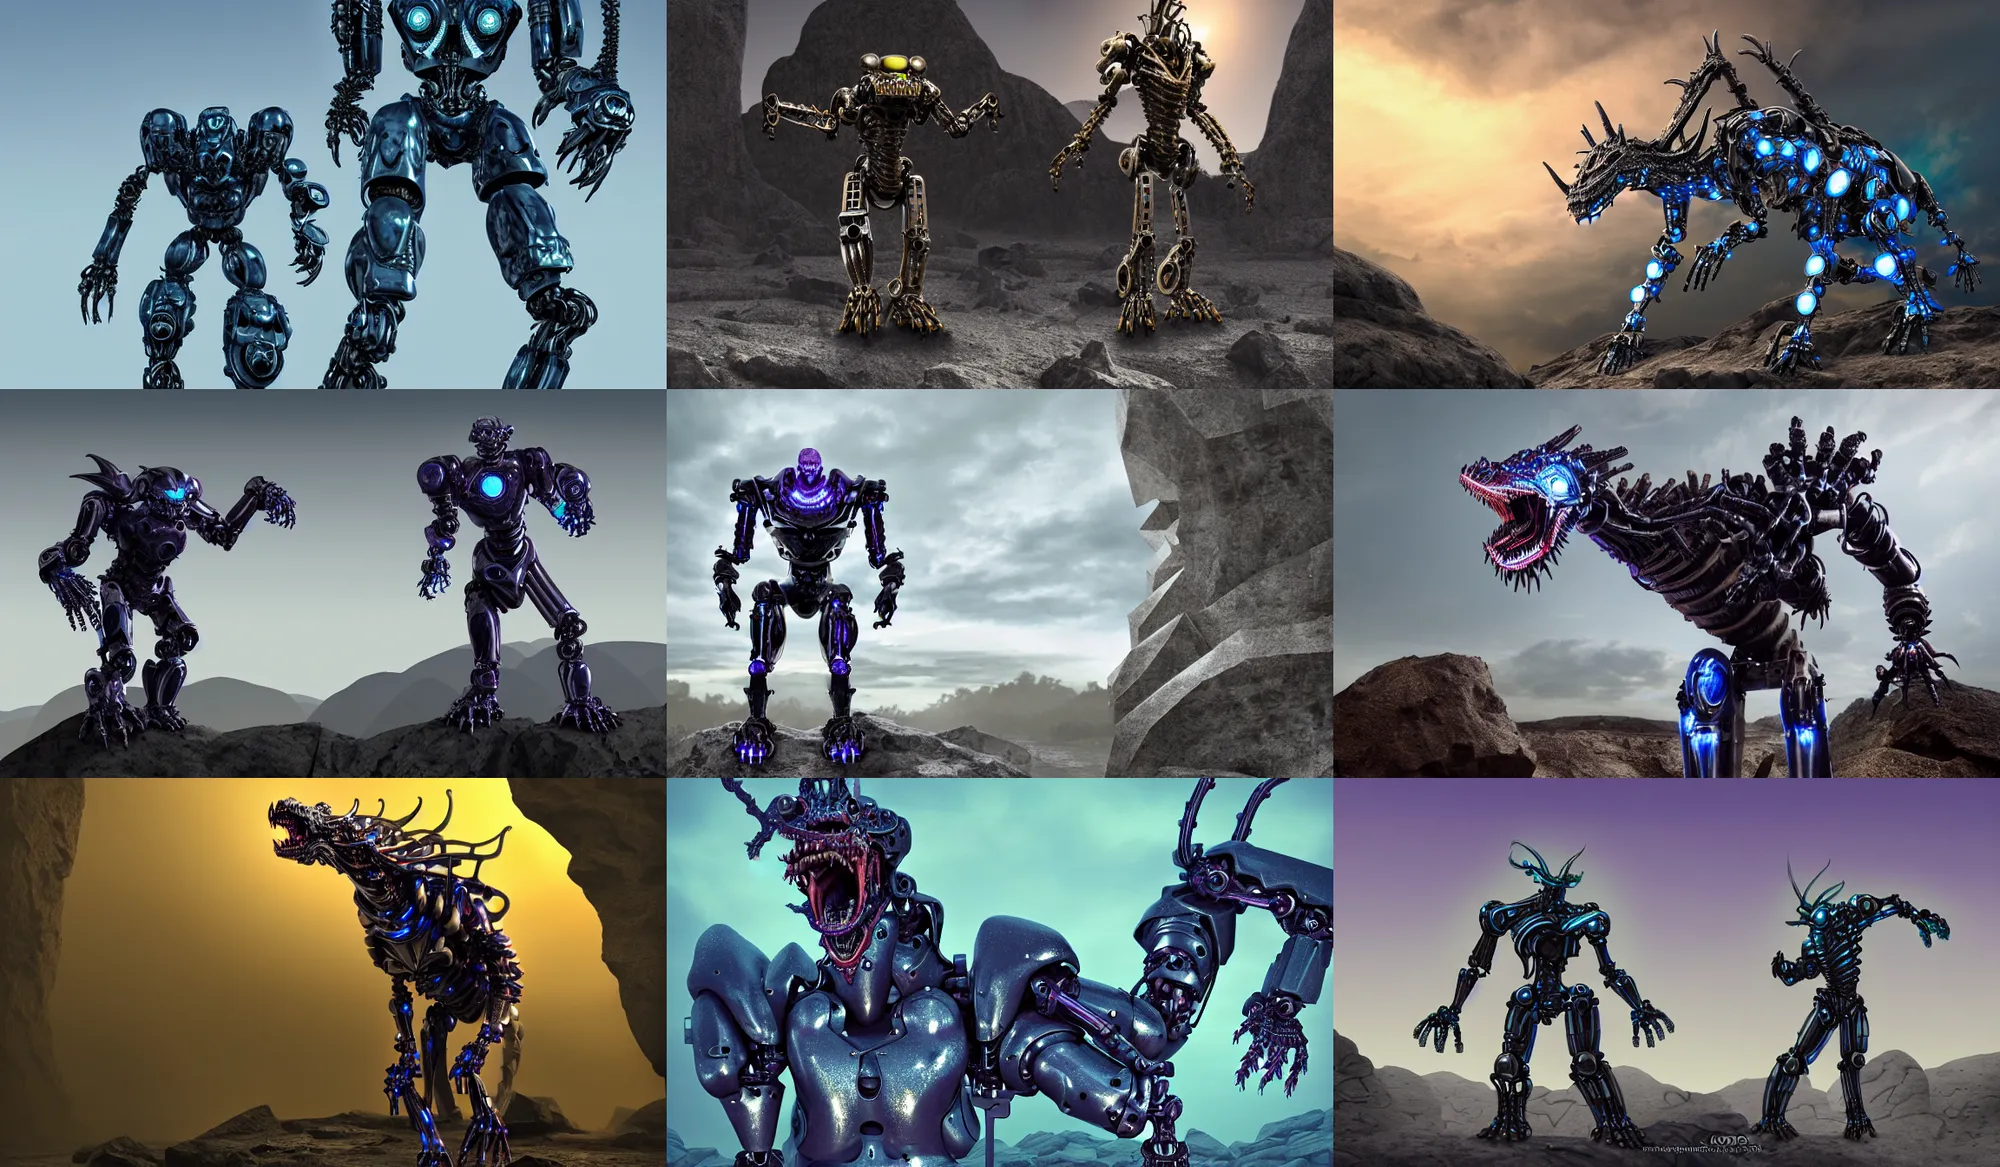 Prompt: Snarling biomechanical anthropomorphic robot dragon armor standing in a rock quarry, high contrast, magic hour photography, good value control, rule of thirds, centered, science fiction, silver and blue color schemes, rubber suit, glowing eyes, glowing mouth, low purple flame, high quality, 4k, matte painting, very detailed, concept art, illustration, League of Legends Character Splash Art